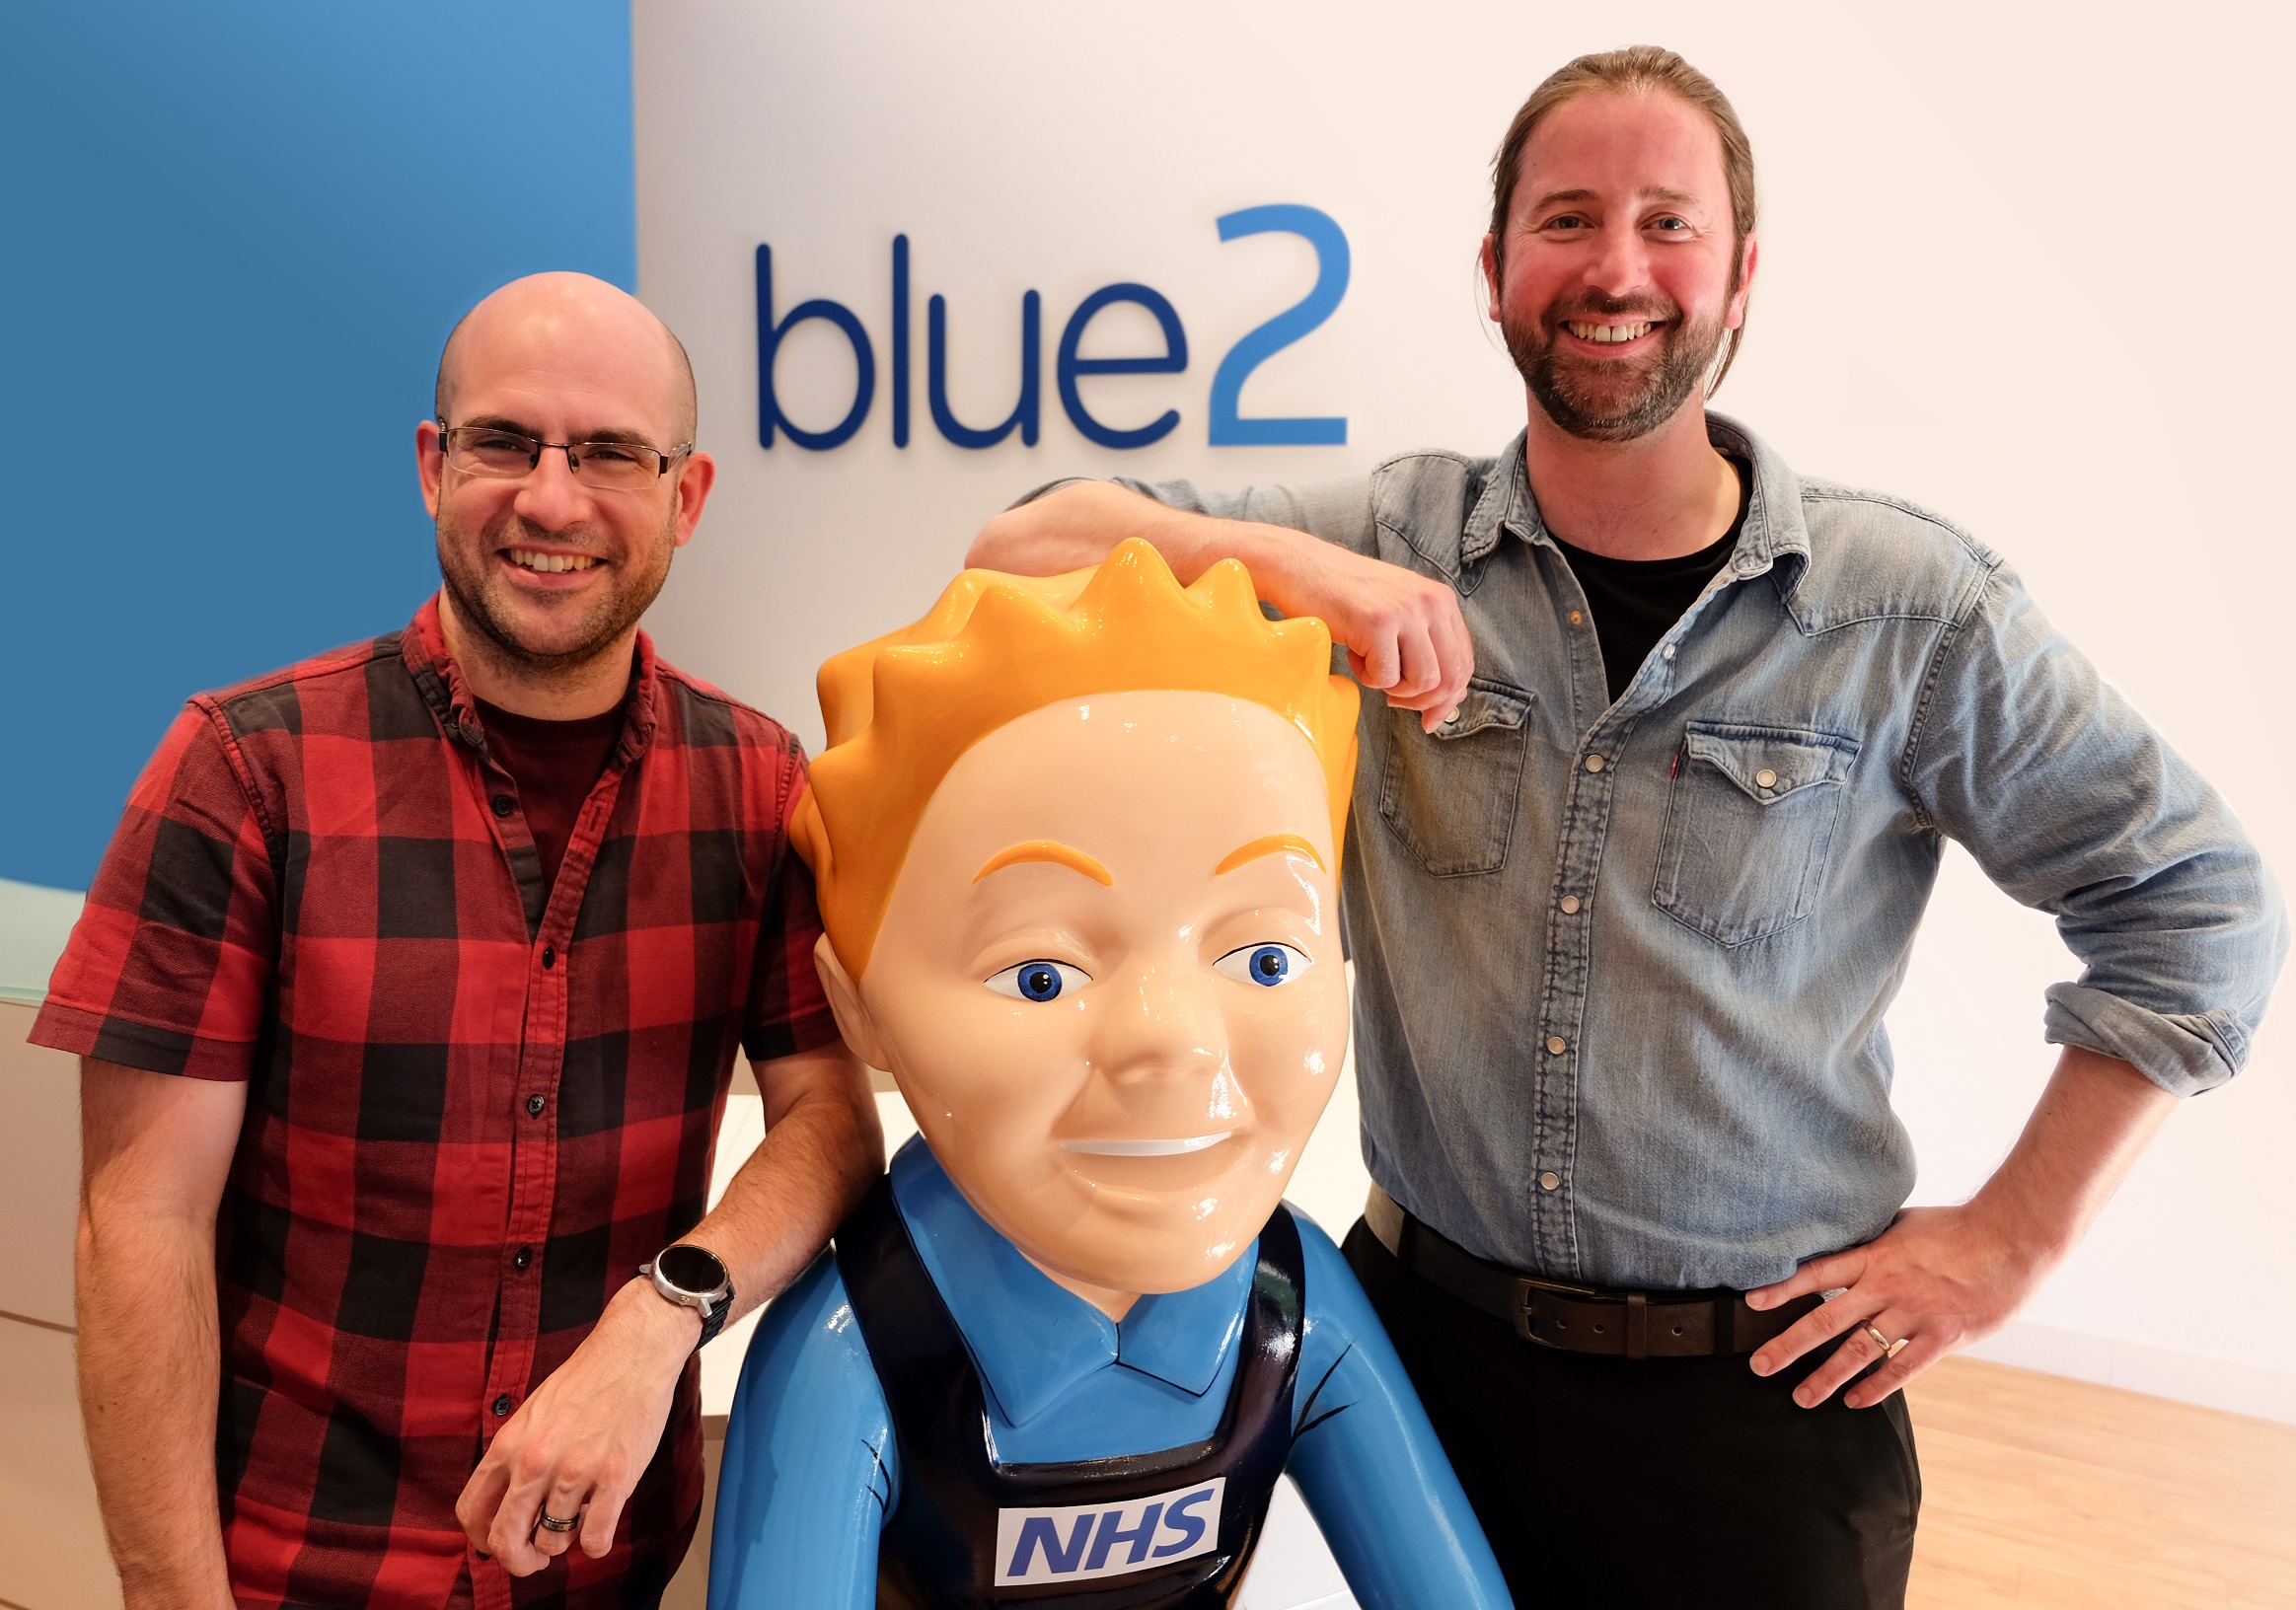 Blue2 announces increase in turnover after securing 12 new client wins in last four months